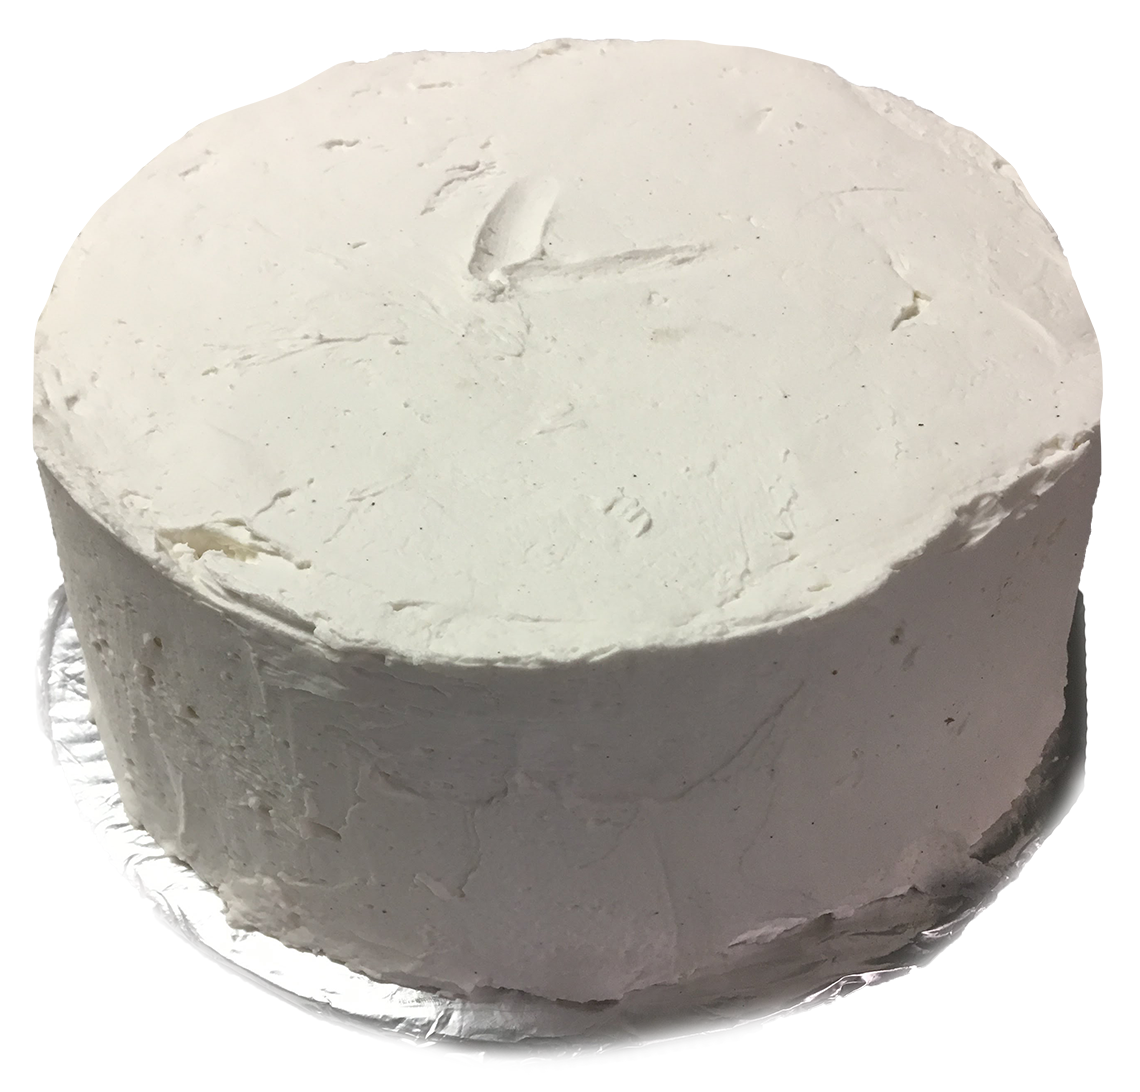 Gluten free vegan 2 Layer Cakes - Frosted. Chocolate Chocolate, Vanilla Vanilla.  Or Chocolate Cake with Vanilla Icing.  Vanilla Cake with Chocolate Frosting.  Available to order online minimum of 3 business days in advance. For customer pickup only.